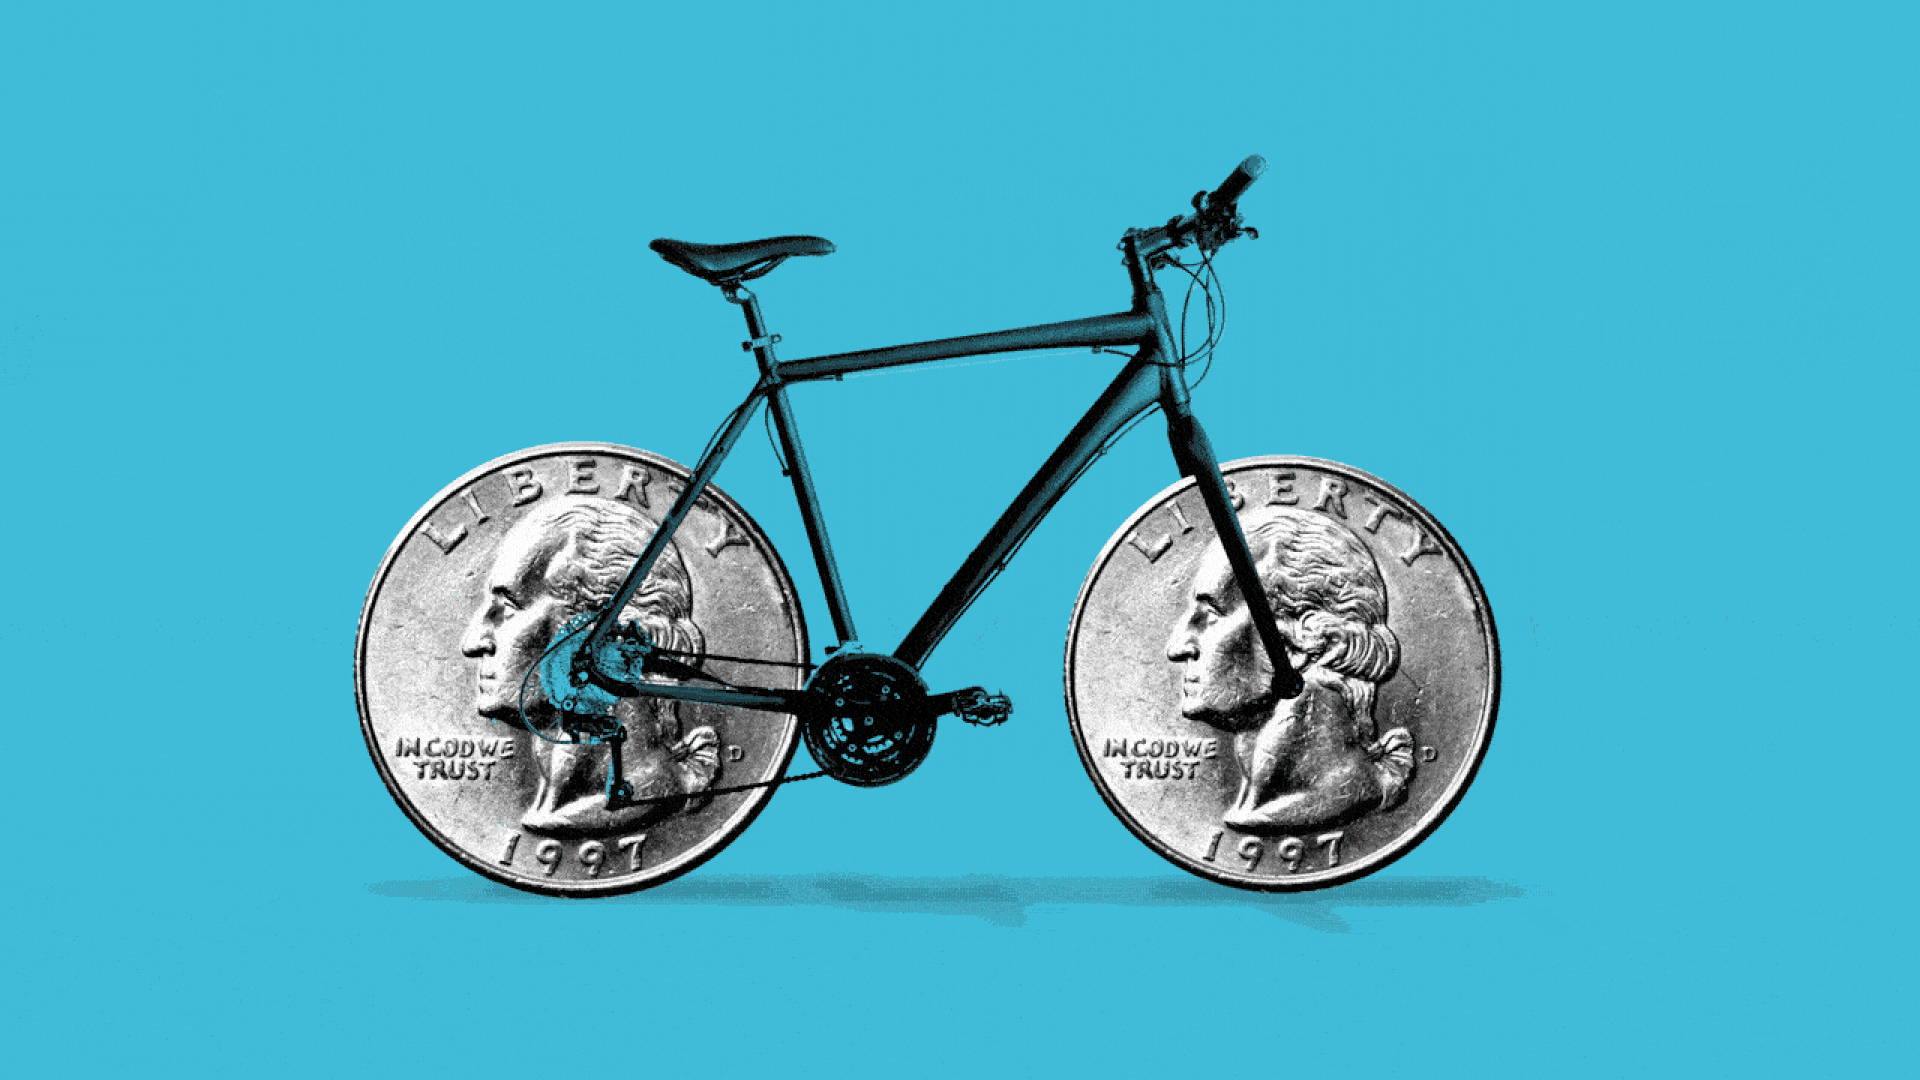 Gif of a bike with quarters for wheels.